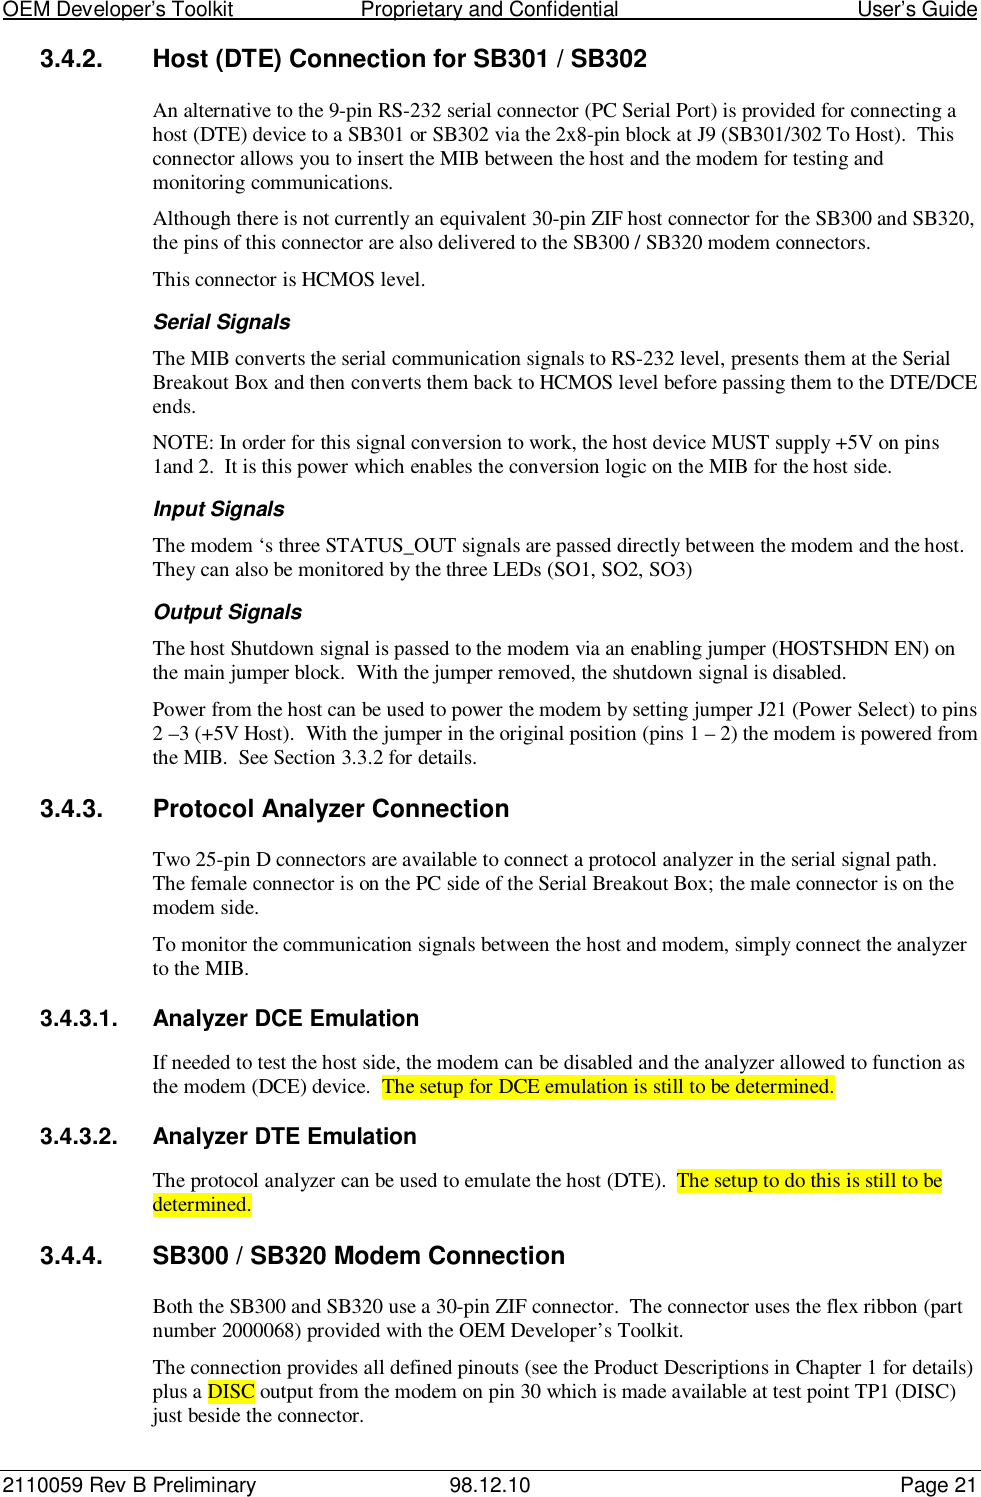 OEM Developer’s Toolkit                        Proprietary and Confidential                                        User’s Guide2110059 Rev B Preliminary 98.12.10 Page 213.4.2.  Host (DTE) Connection for SB301 / SB302An alternative to the 9-pin RS-232 serial connector (PC Serial Port) is provided for connecting ahost (DTE) device to a SB301 or SB302 via the 2x8-pin block at J9 (SB301/302 To Host).  Thisconnector allows you to insert the MIB between the host and the modem for testing andmonitoring communications.Although there is not currently an equivalent 30-pin ZIF host connector for the SB300 and SB320,the pins of this connector are also delivered to the SB300 / SB320 modem connectors.This connector is HCMOS level.Serial SignalsThe MIB converts the serial communication signals to RS-232 level, presents them at the SerialBreakout Box and then converts them back to HCMOS level before passing them to the DTE/DCEends.NOTE: In order for this signal conversion to work, the host device MUST supply +5V on pins1and 2.  It is this power which enables the conversion logic on the MIB for the host side.Input SignalsThe modem ‘s three STATUS_OUT signals are passed directly between the modem and the host.They can also be monitored by the three LEDs (SO1, SO2, SO3)Output SignalsThe host Shutdown signal is passed to the modem via an enabling jumper (HOSTSHDN EN) onthe main jumper block.  With the jumper removed, the shutdown signal is disabled.Power from the host can be used to power the modem by setting jumper J21 (Power Select) to pins2 –3 (+5V Host).  With the jumper in the original position (pins 1 – 2) the modem is powered fromthe MIB.  See Section 3.3.2 for details.3.4.3.  Protocol Analyzer ConnectionTwo 25-pin D connectors are available to connect a protocol analyzer in the serial signal path.The female connector is on the PC side of the Serial Breakout Box; the male connector is on themodem side.To monitor the communication signals between the host and modem, simply connect the analyzerto the MIB.3.4.3.1.  Analyzer DCE EmulationIf needed to test the host side, the modem can be disabled and the analyzer allowed to function asthe modem (DCE) device.  The setup for DCE emulation is still to be determined.3.4.3.2.  Analyzer DTE EmulationThe protocol analyzer can be used to emulate the host (DTE).  The setup to do this is still to bedetermined.3.4.4.  SB300 / SB320 Modem ConnectionBoth the SB300 and SB320 use a 30-pin ZIF connector.  The connector uses the flex ribbon (partnumber 2000068) provided with the OEM Developer’s Toolkit.The connection provides all defined pinouts (see the Product Descriptions in Chapter 1 for details)plus a DISC output from the modem on pin 30 which is made available at test point TP1 (DISC)just beside the connector.